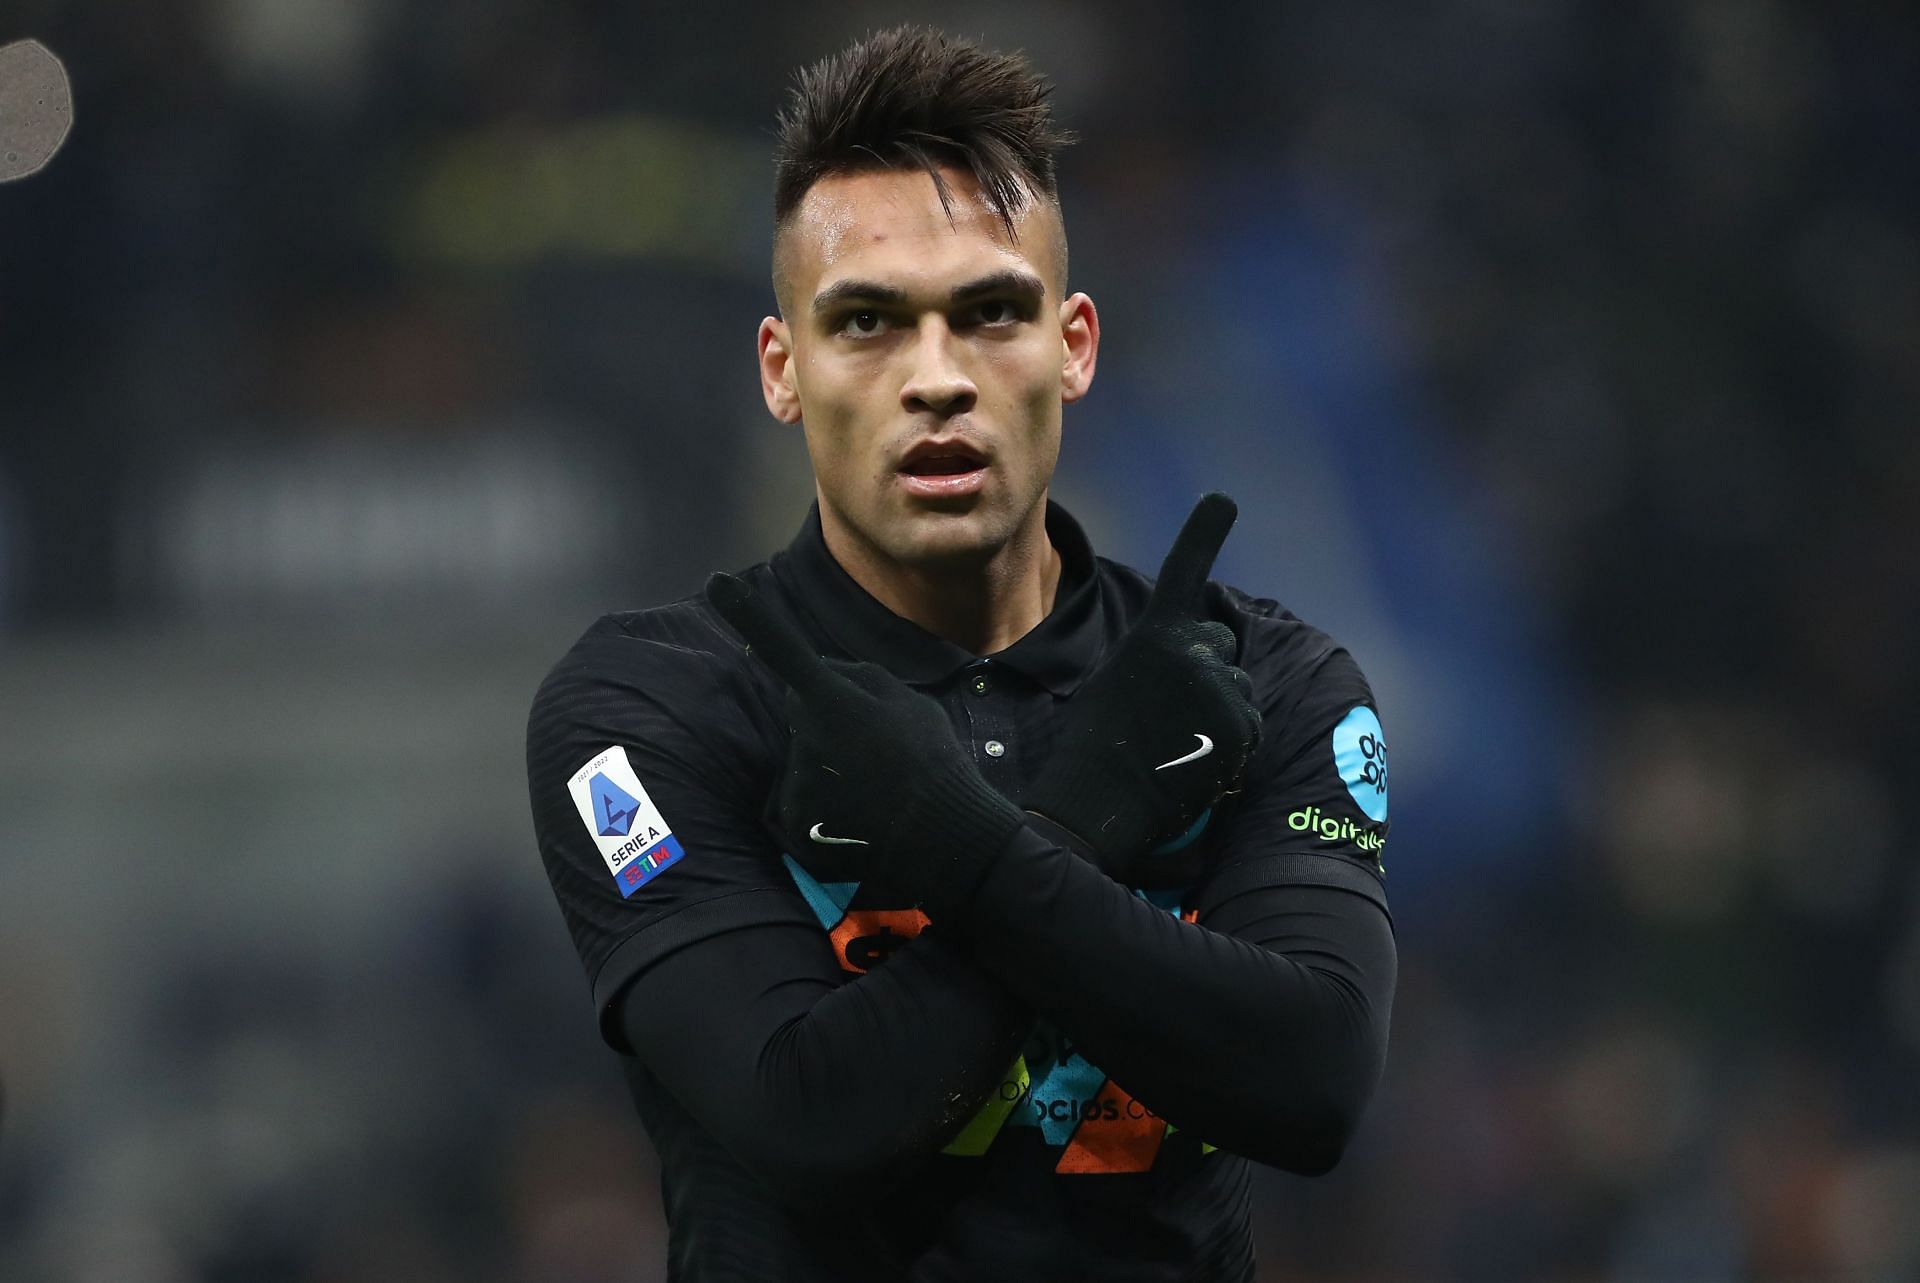 Lautaro Martinez has wanted to move to the Premier League in the past and could join Tottenham.